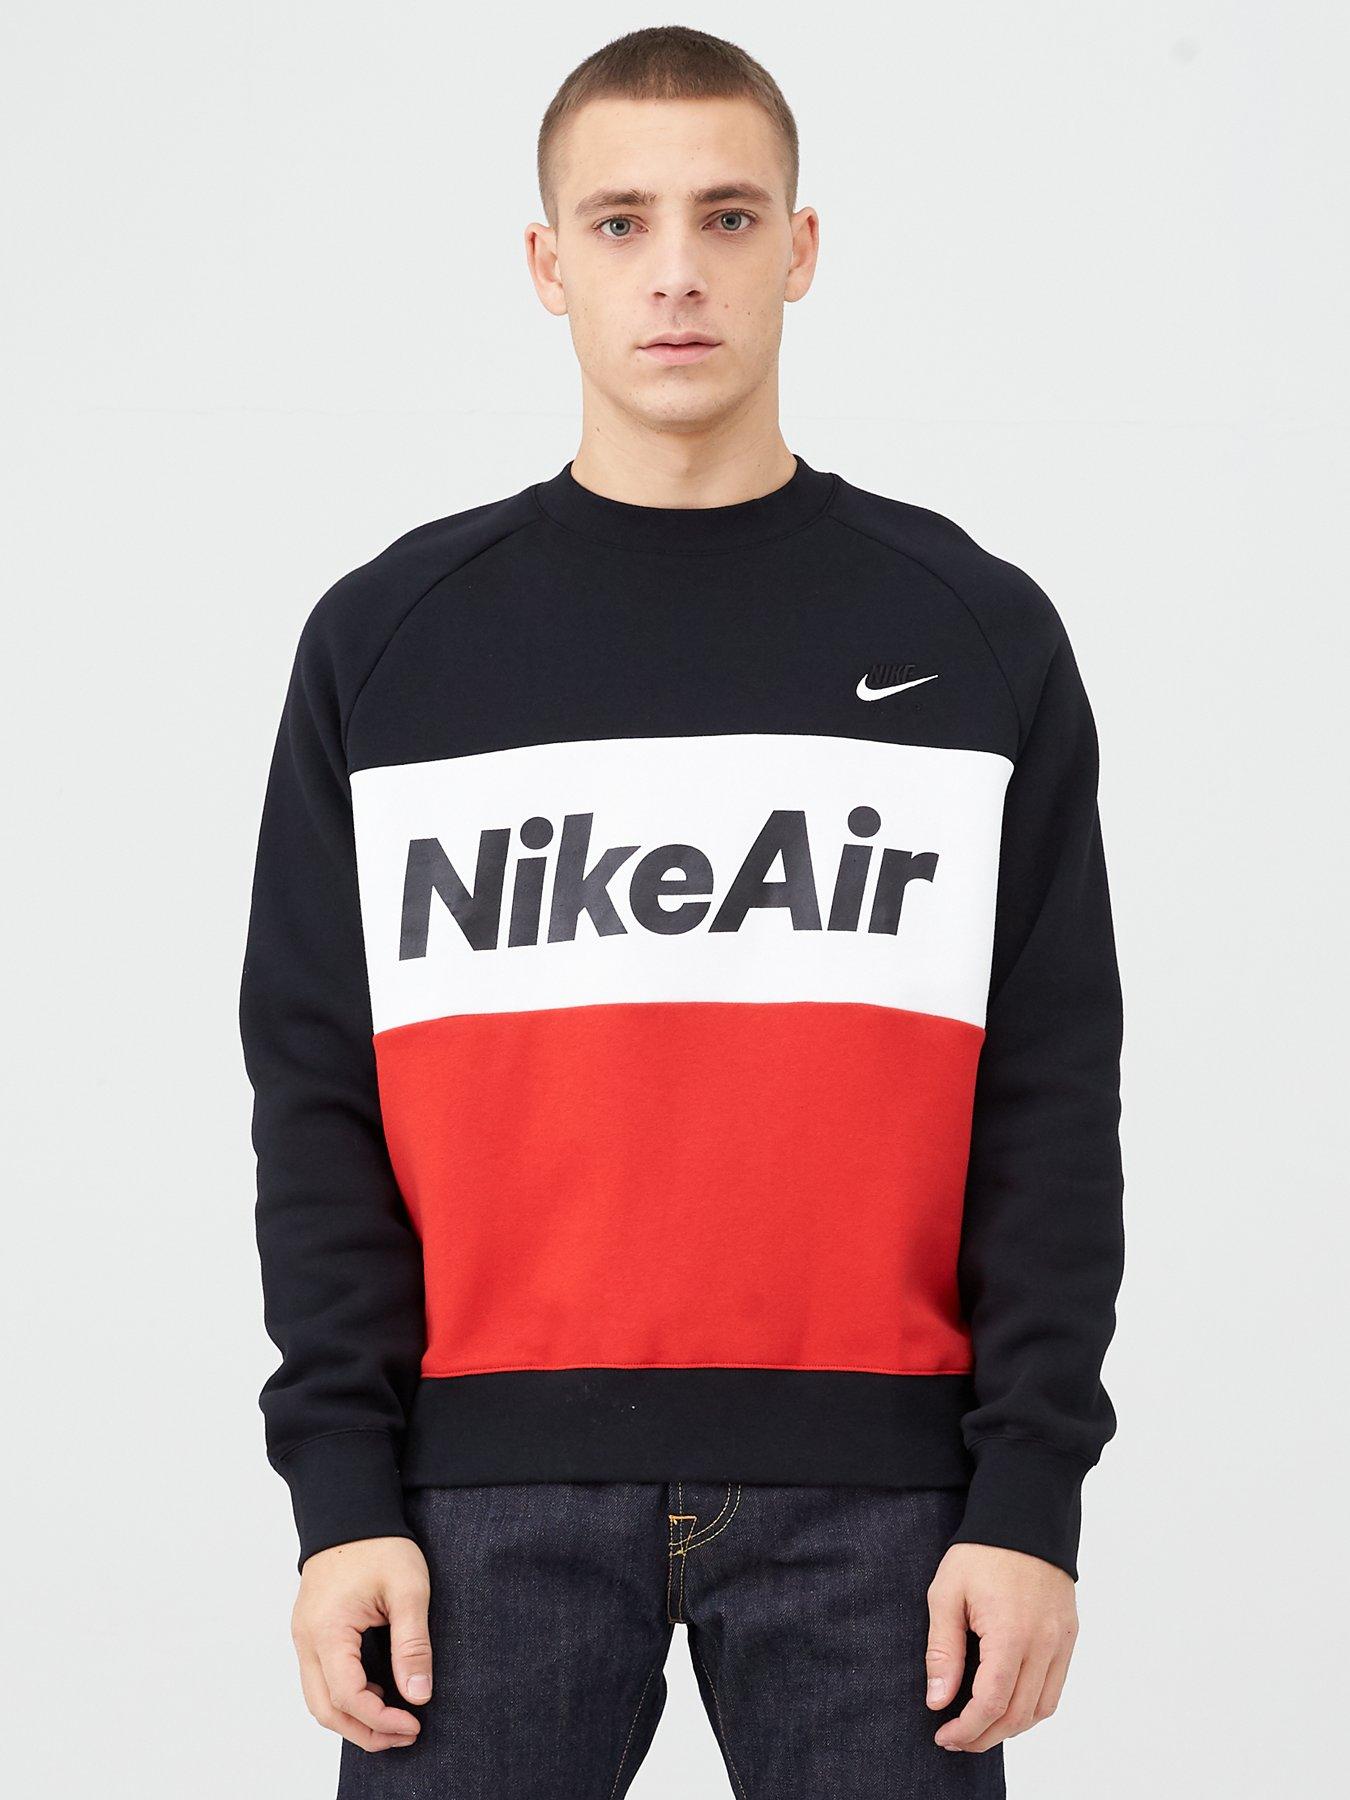 nike sweater red and black